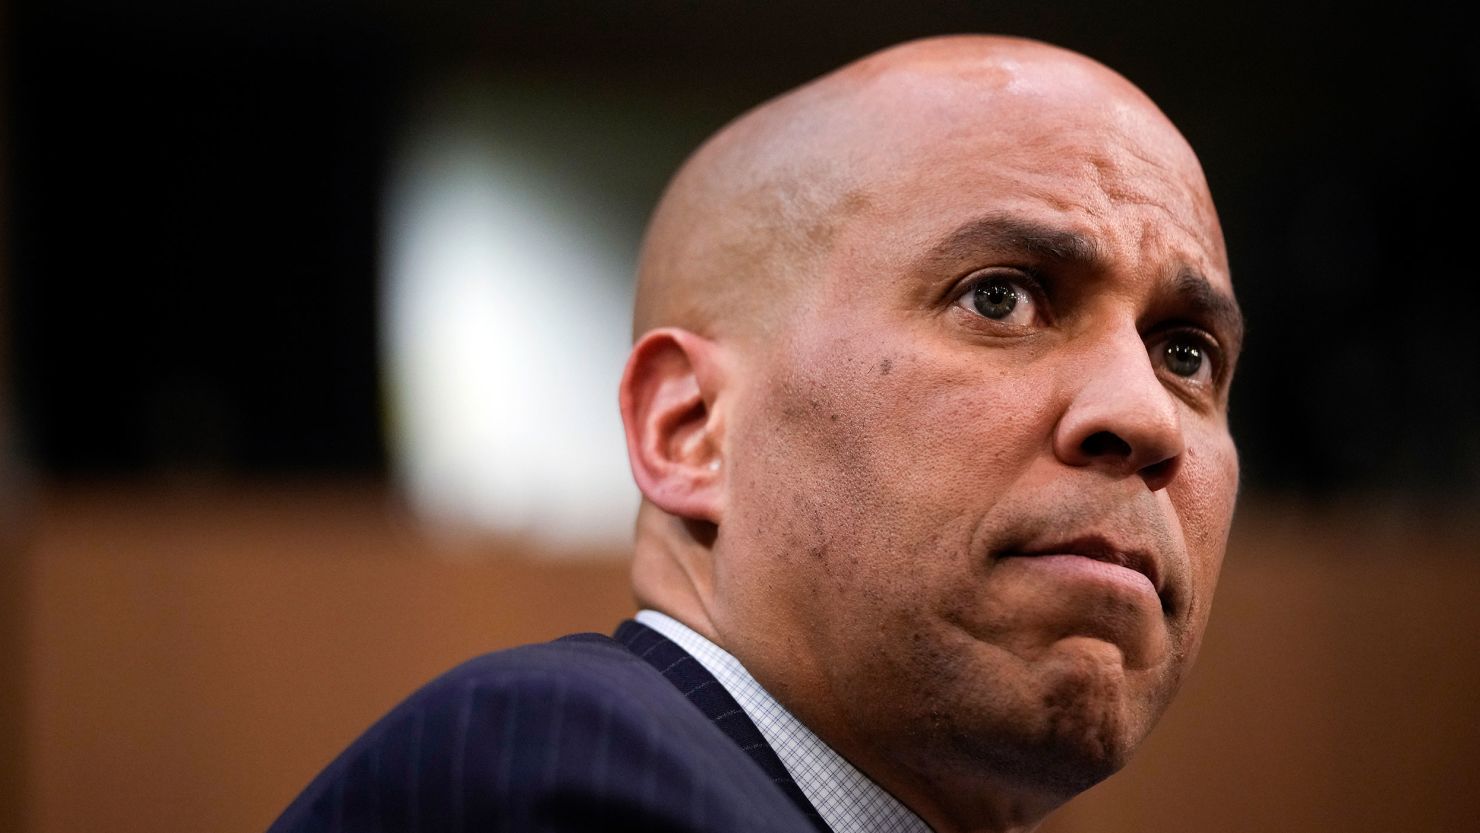 Sen. Cory Booker is seen in the Hart Senate Office Building on Capitol Hill on March 21, 2022 in Washington, DC. Booker was one of the lead negotiators on legislation to overhaul policing laws. 